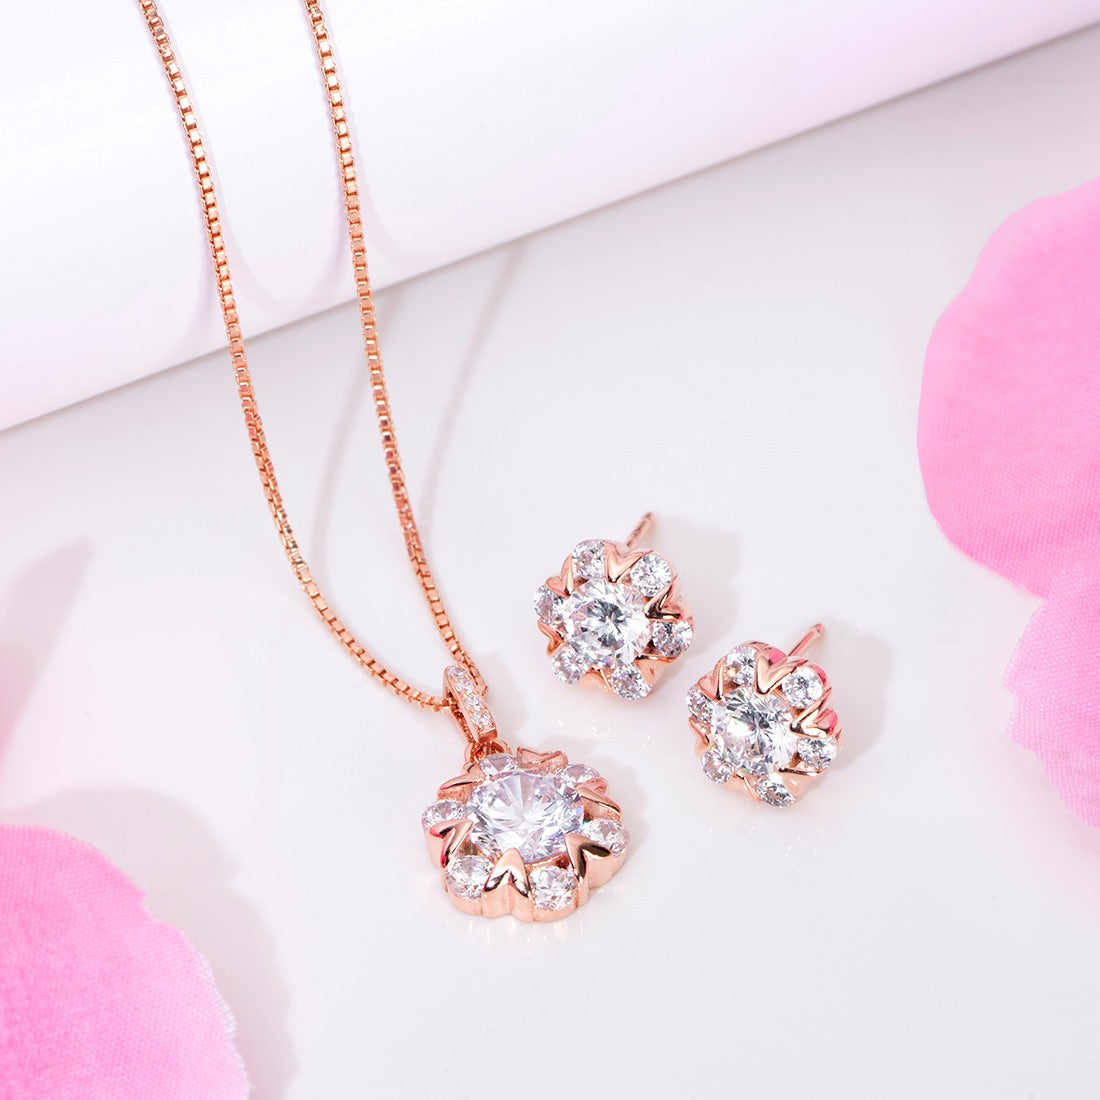 Blooms in Blush 925 Sterling Silver Rose Gold-Plated Jewelry Set